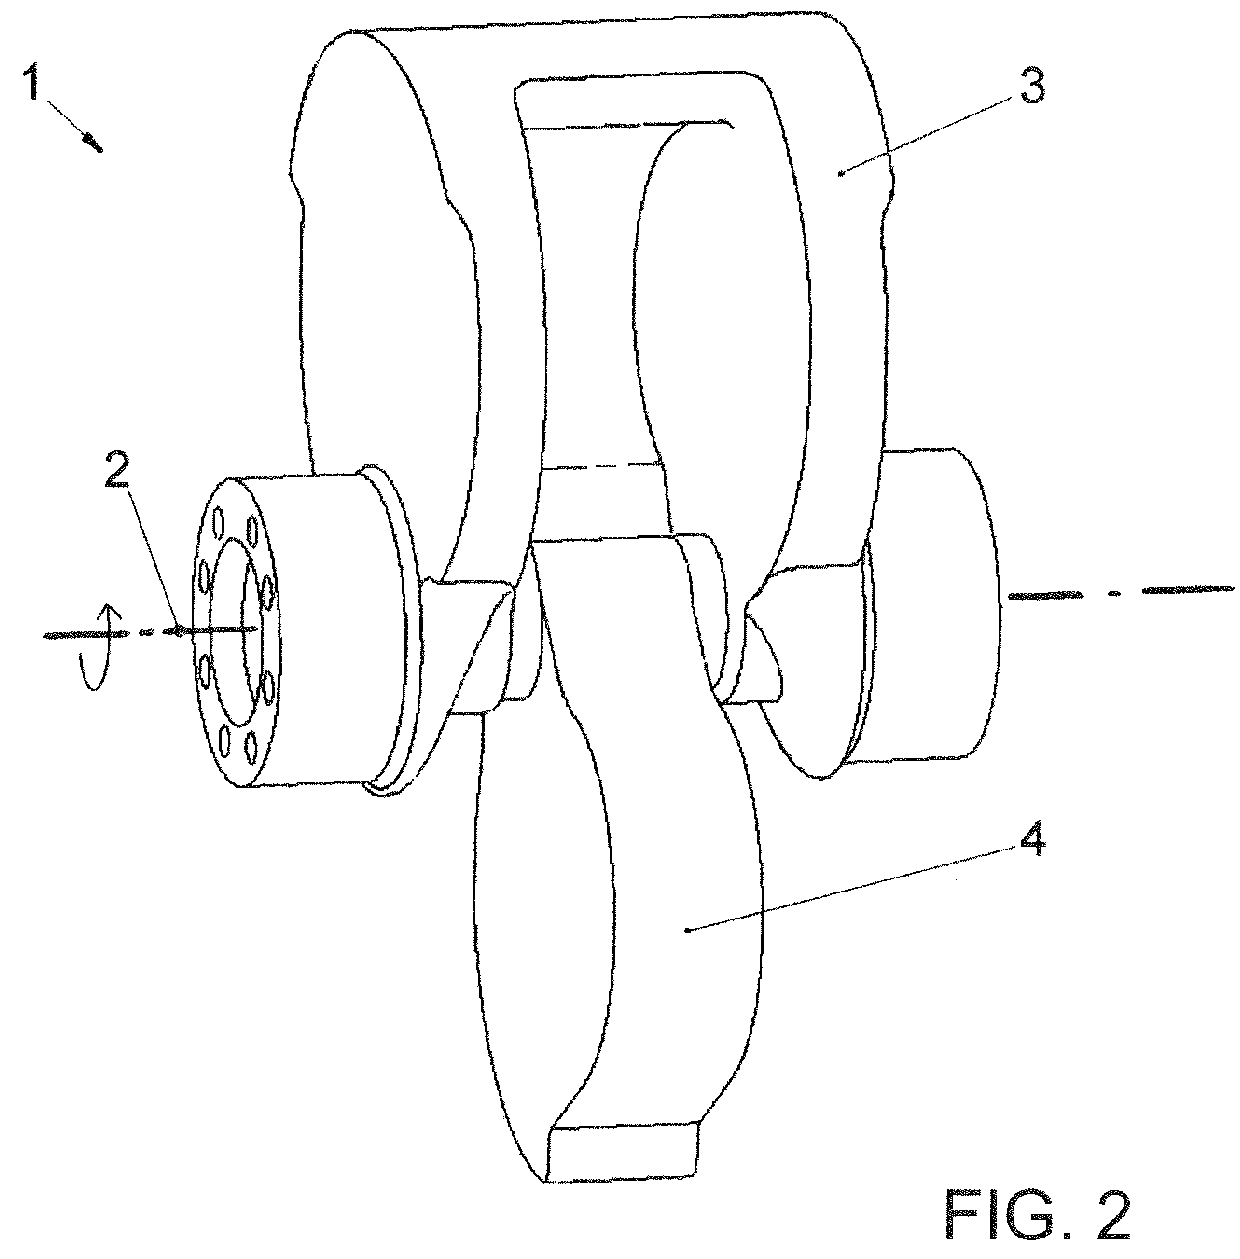 Eccentric shaft assembly having fixed and movable eccentric masses